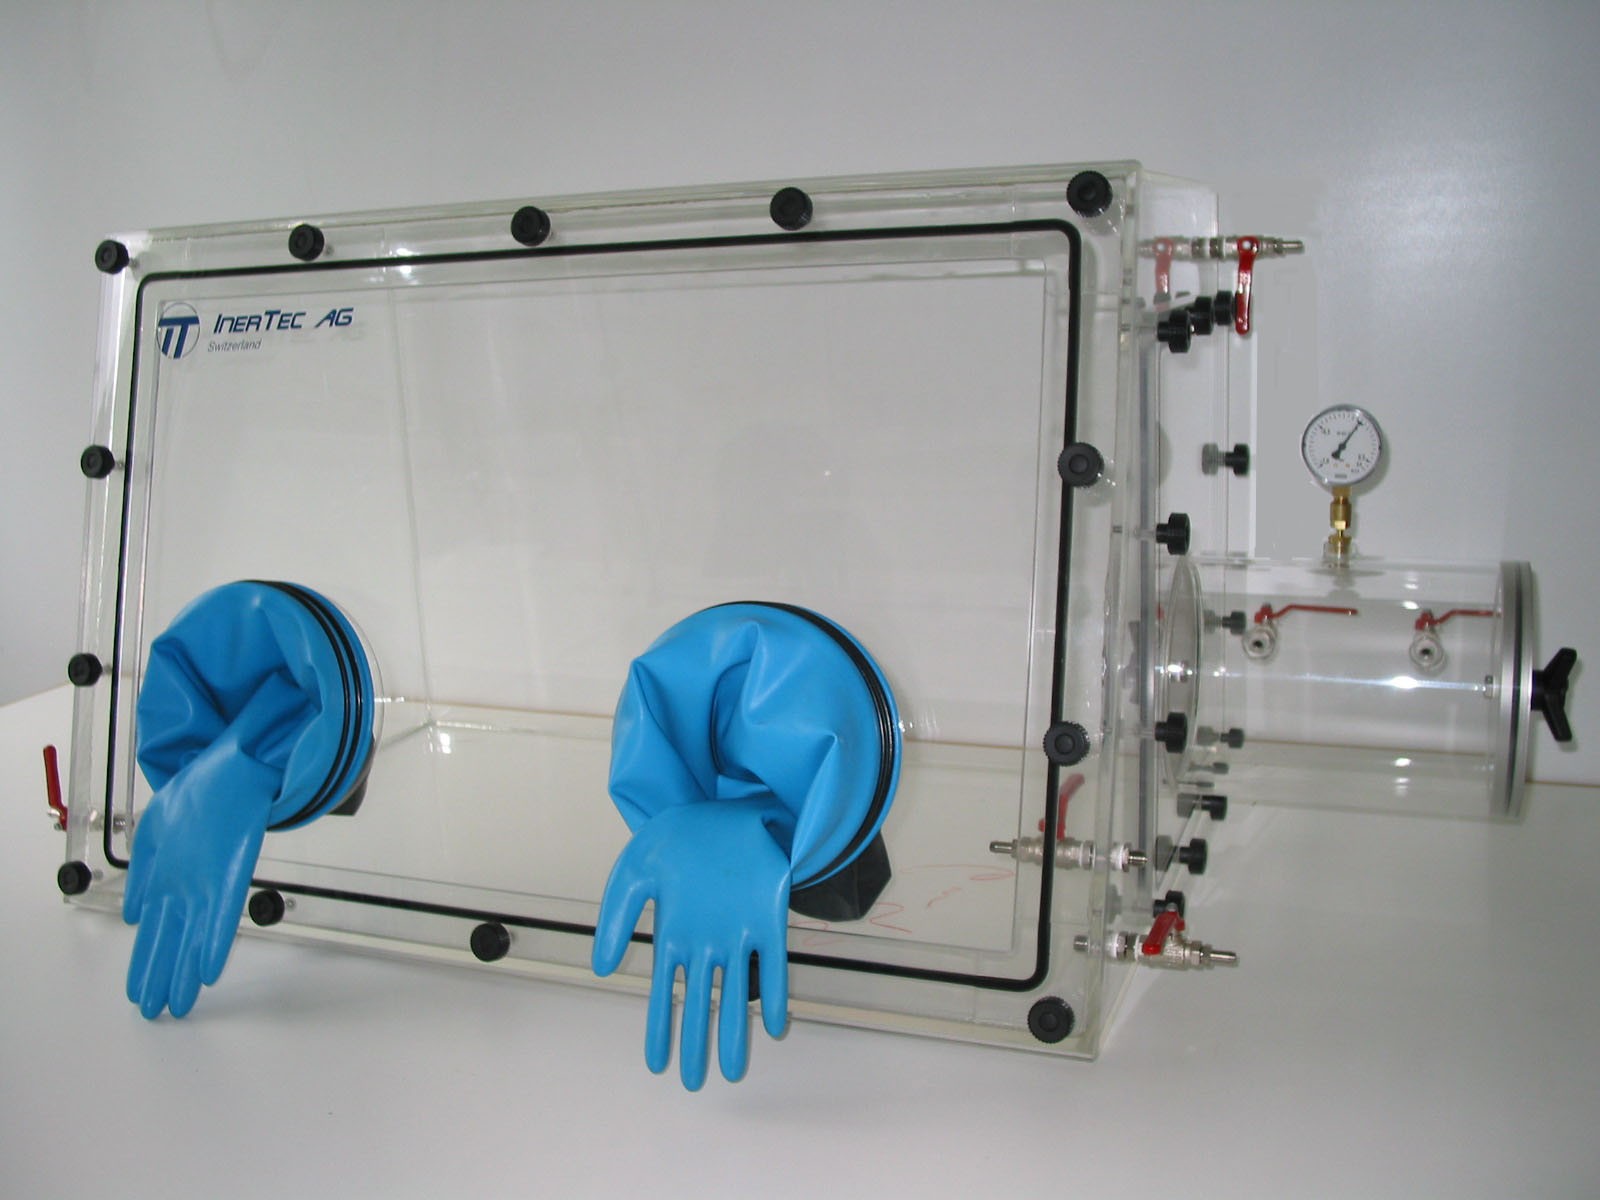 Glovebox made of acrylic&gt; Gas filling: by hand, front design: swivels upwards, side design: round vacuum lock, control: oxygen and humidity display